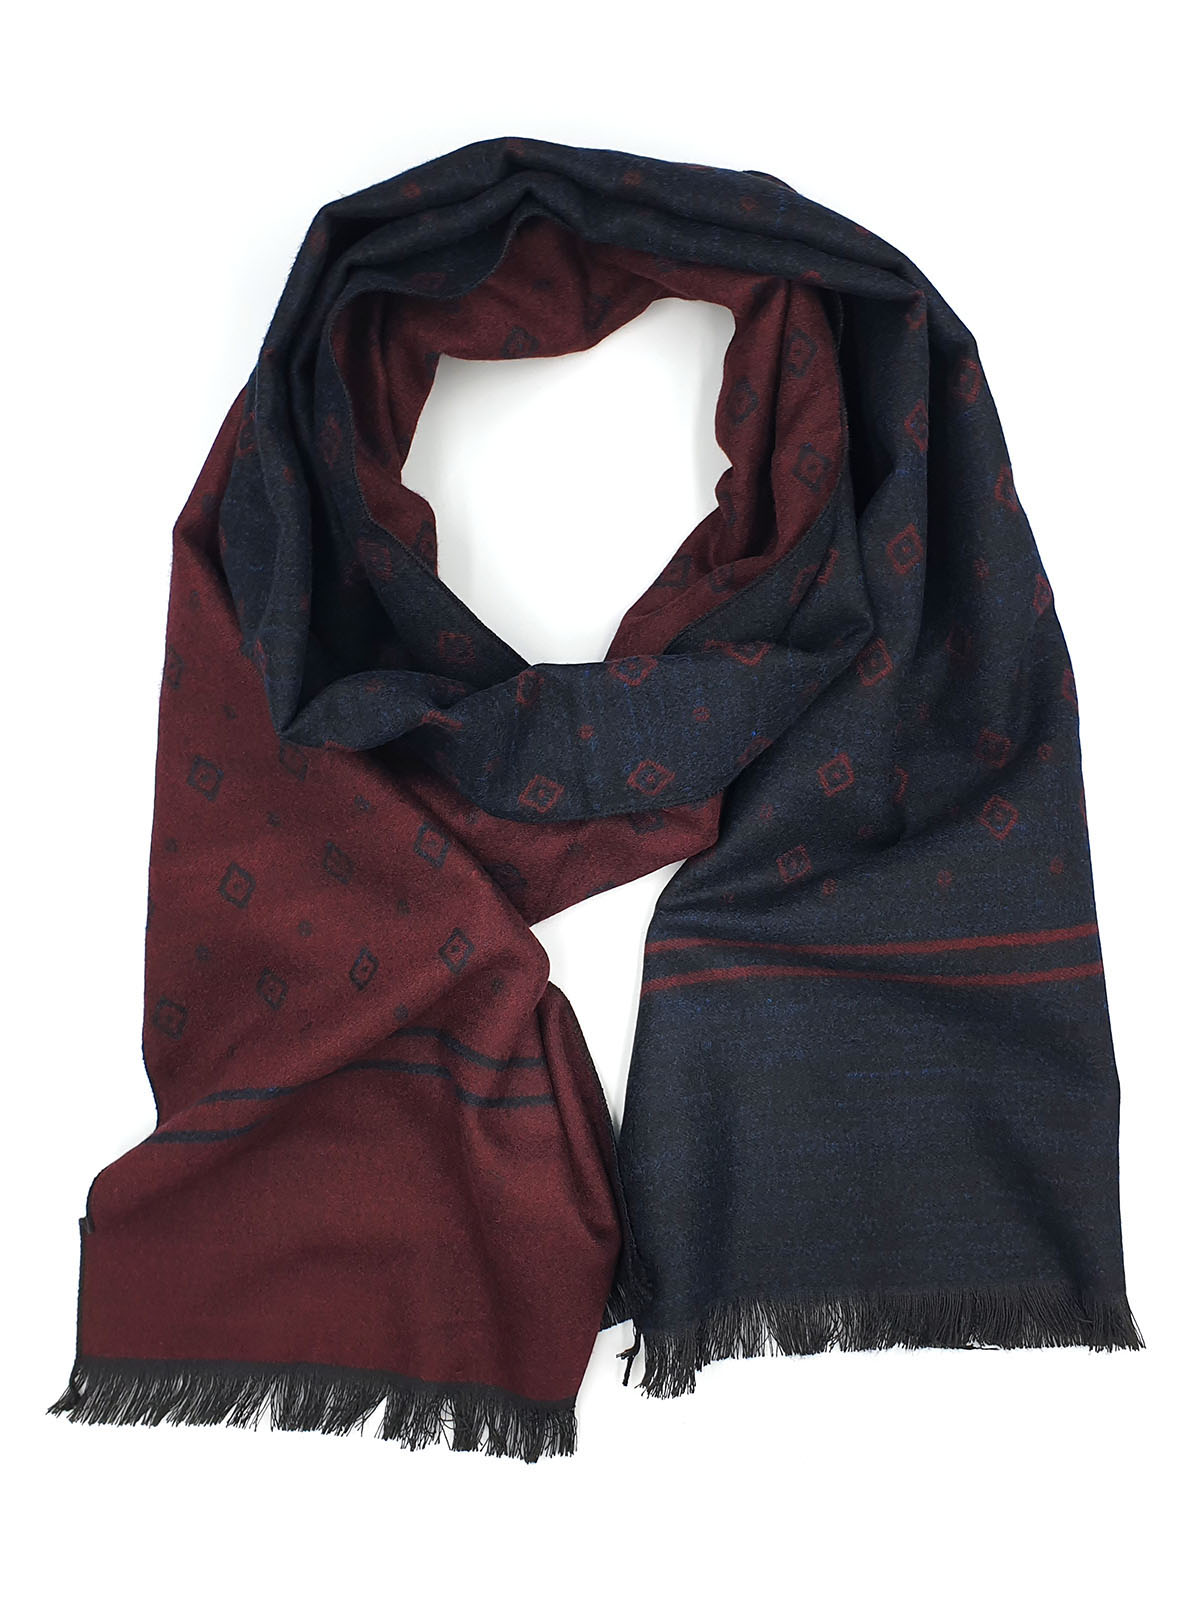 Doublesided scarf in burgundy and black - 10329 - € 19.68 img3